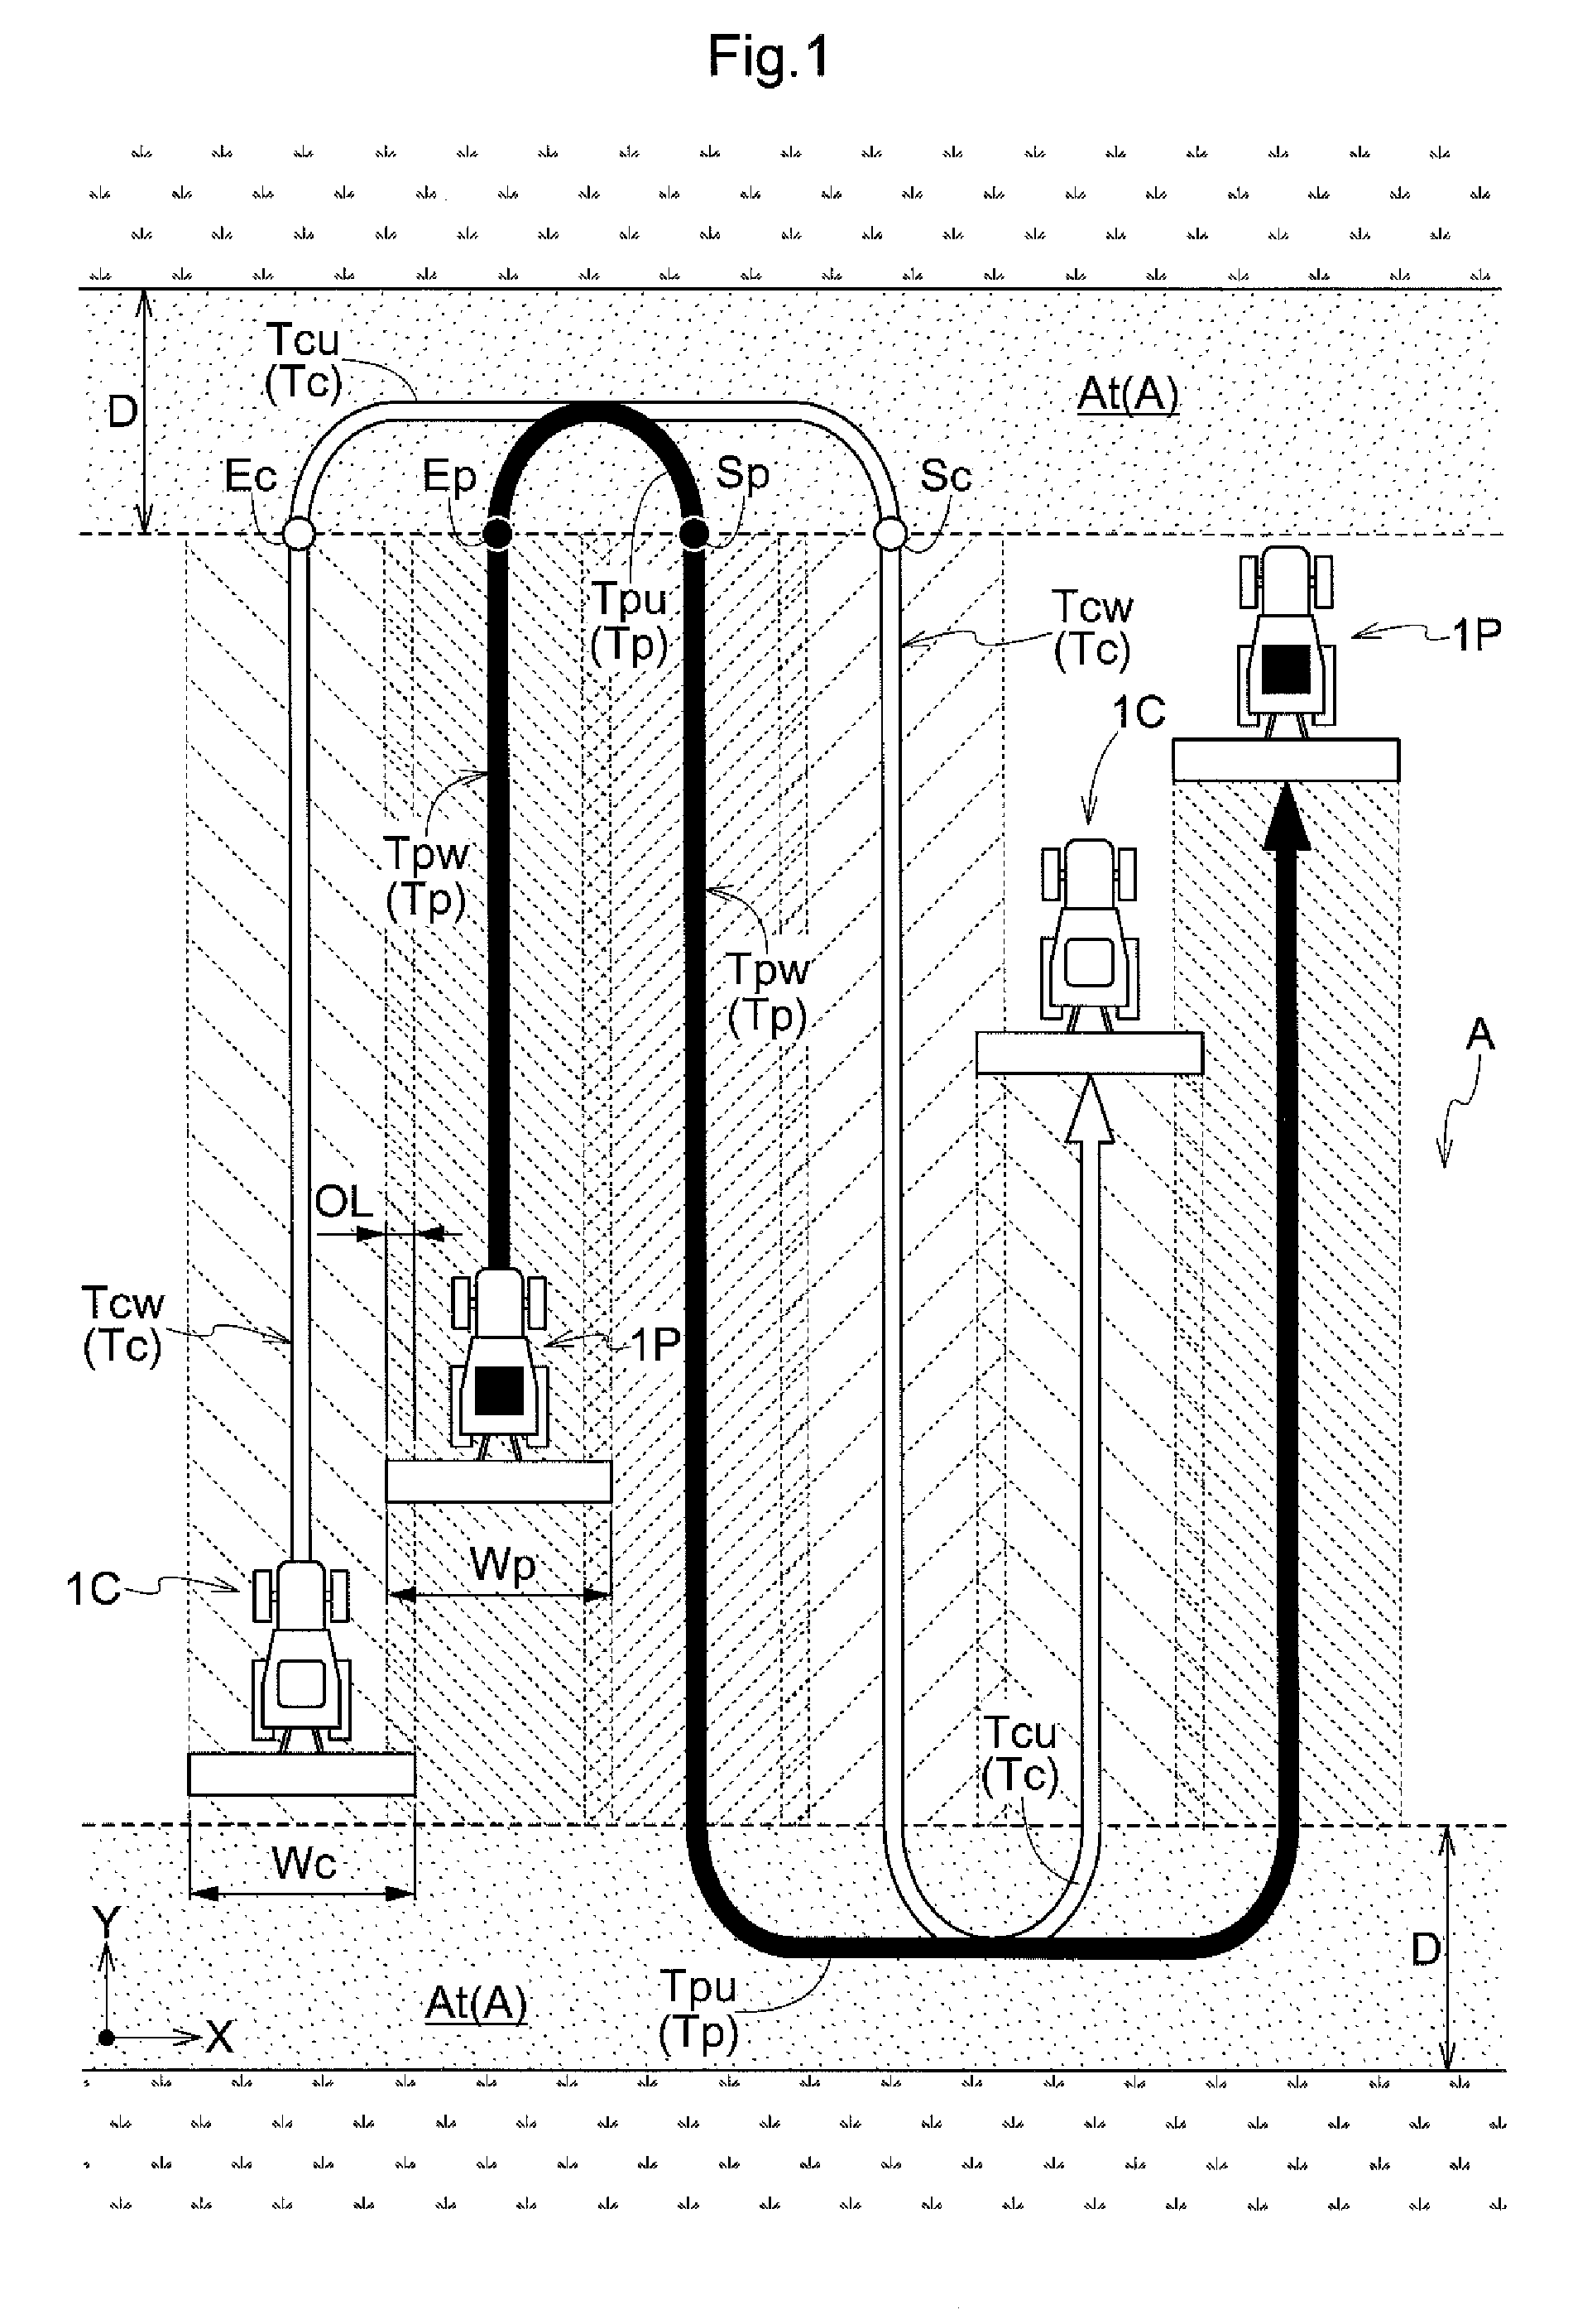 Work vehicle coordinating system